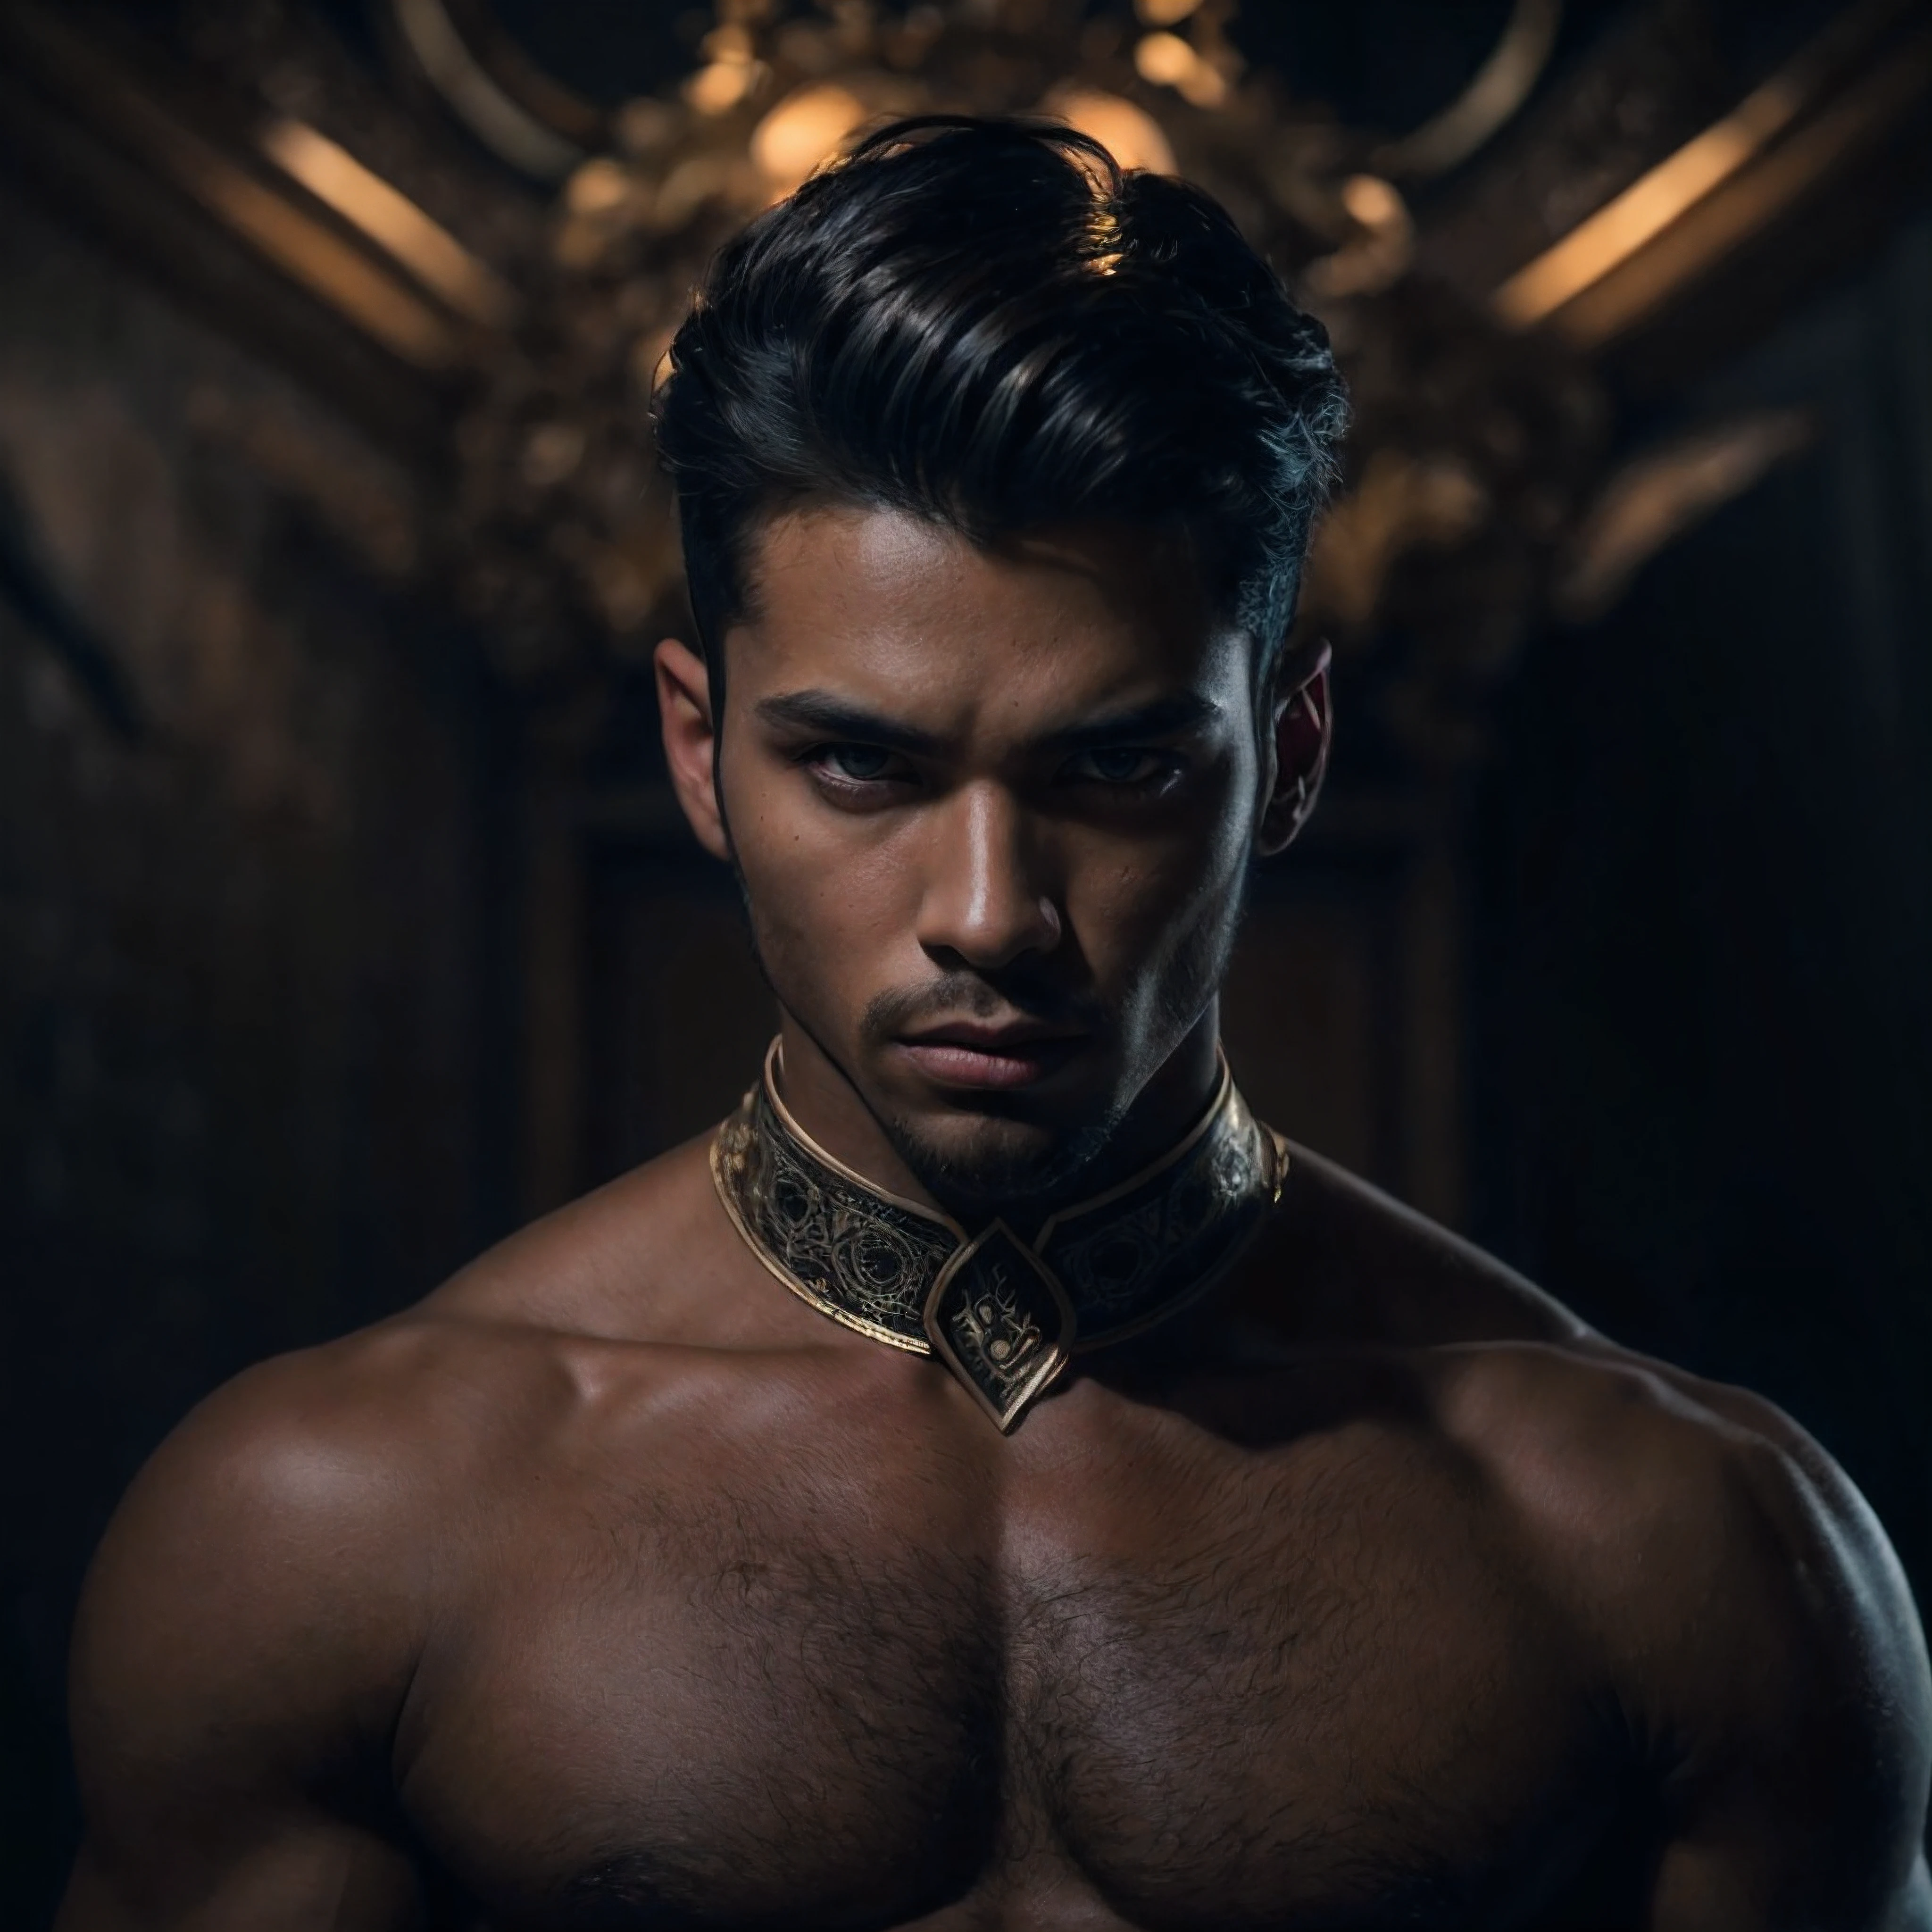 A professional portrait photograph of a confident male ifrit wearing elegant futuristic clothes, the photograph captured in stunning 8k resolution and raw format to preserve the highest quality of details, (his eyes are portrayed with meticulous attention to detail: 1.3), The photograph is taken with a lens that emphasizes the depth in his eyes, the backdrop is a dark room setting that enhances the contour light. The lighting and shadows are expertly crafted to bring out the richness of his skin tone and the intense atmosphere. His hair adds contrast against his skin, the overall composition captures the subject's essence with authenticity and grace, creating a portrait that celebrates heritage and beauty. Photography utilizing the best techniques for shadow and lighting, to create a mesmerizing portrayal that transcends the visual,